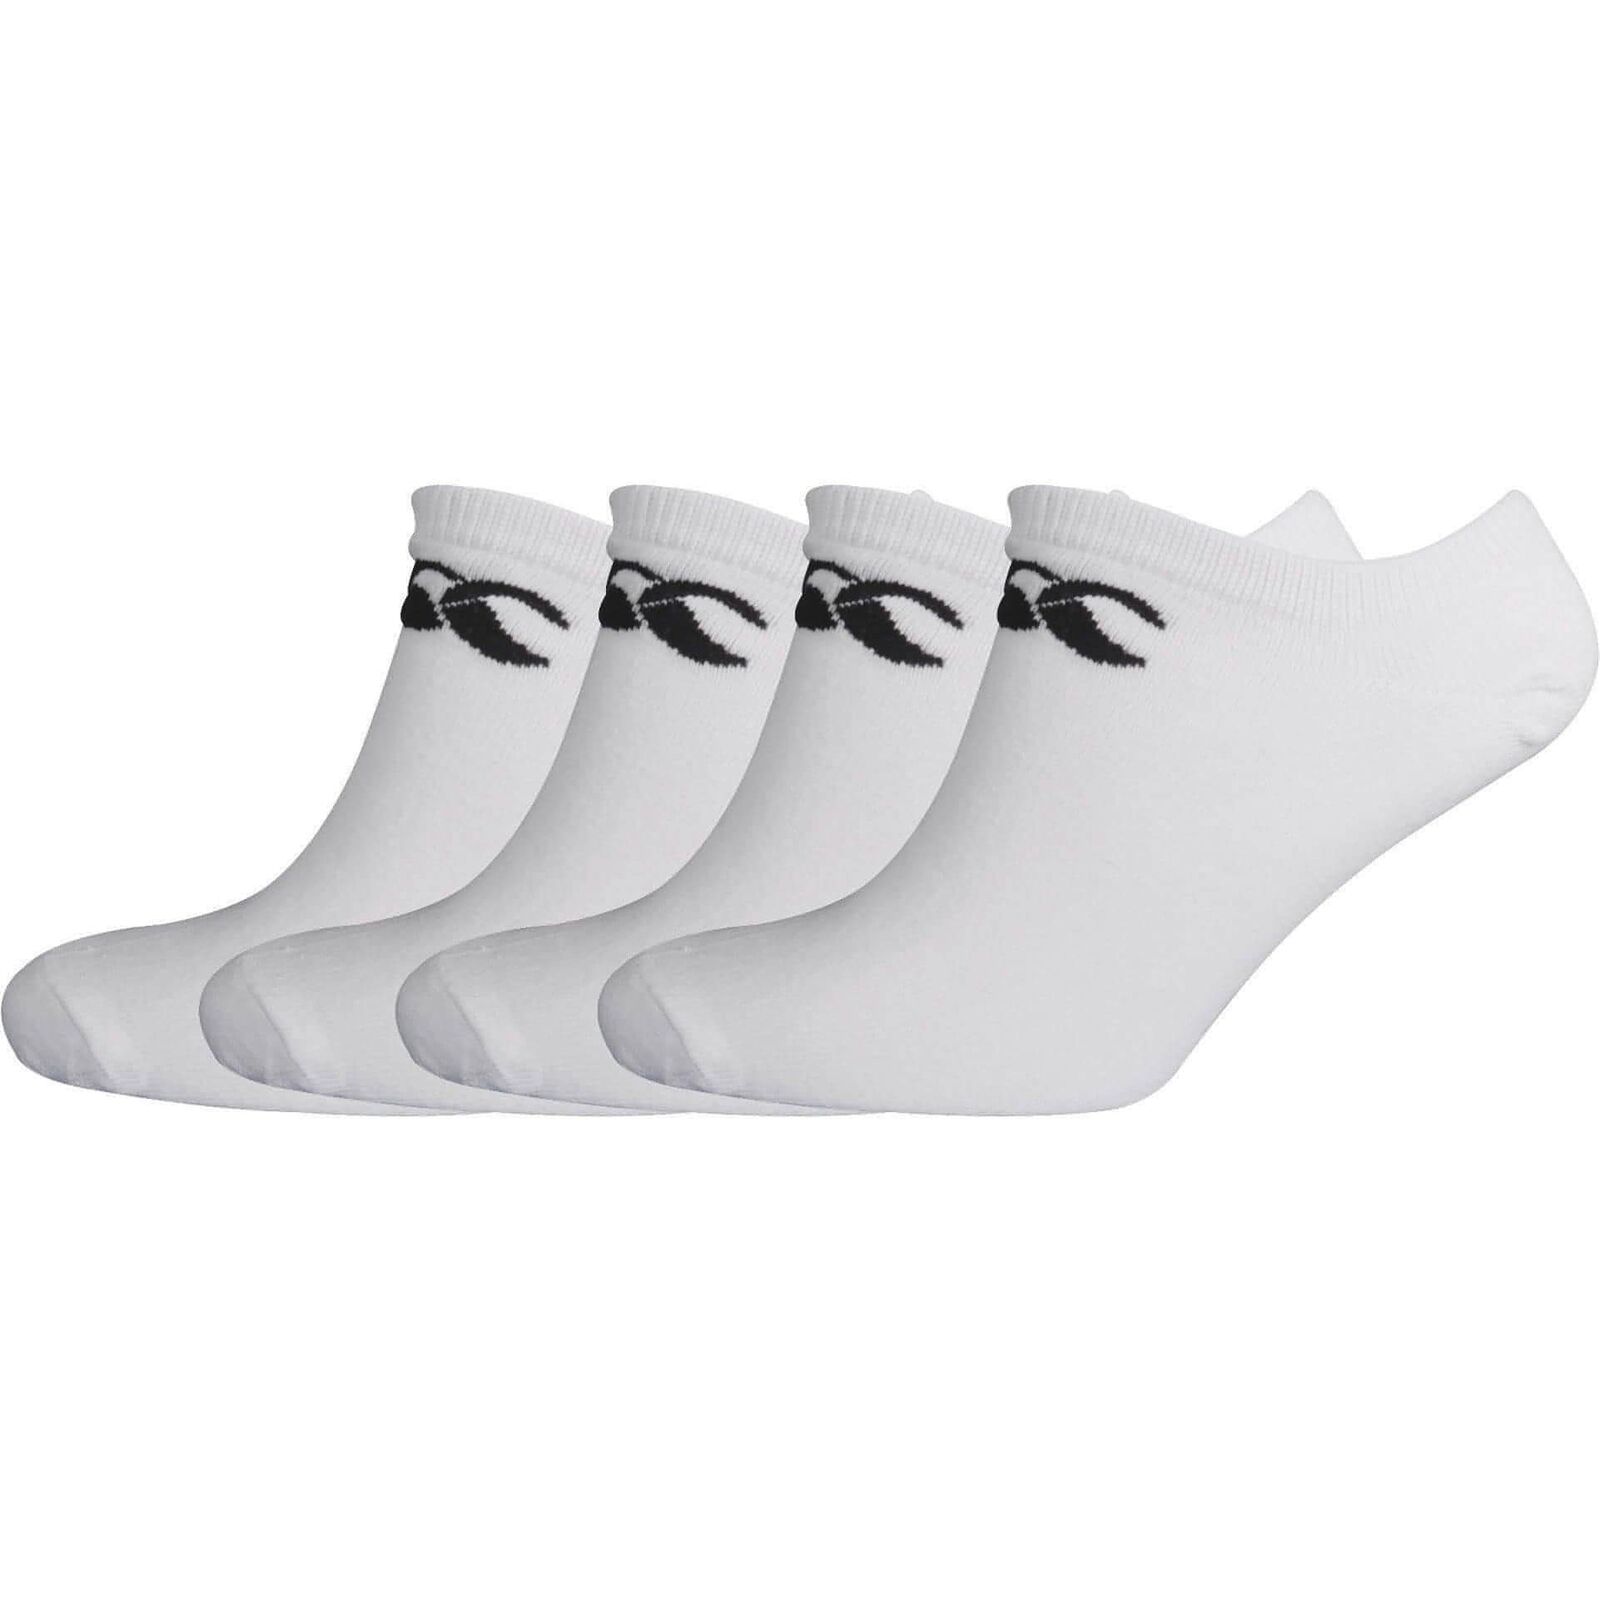 Canterbury 4 Pack Sport Socks White Cotton Low Cut Gym Training Workout Exercise